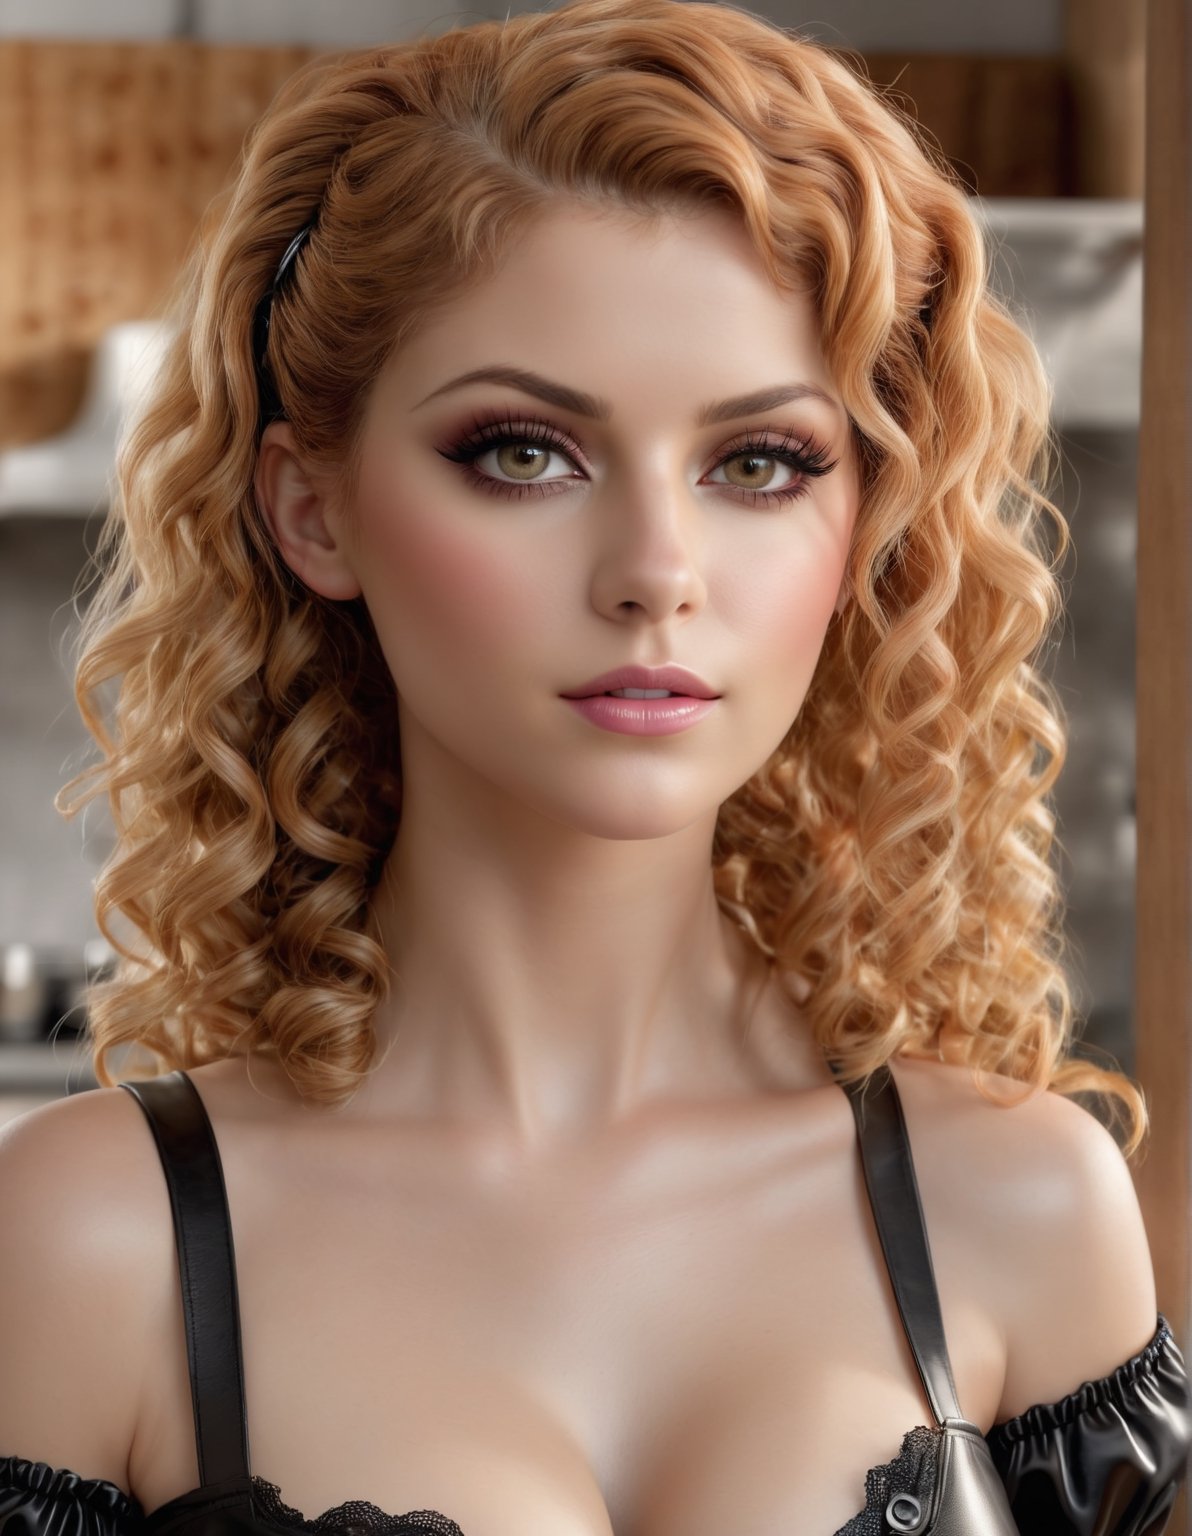 ((photorealistic)), perfect anatomy, realistic skin, detailed eyes, detailed face, hazel eyes, ((smokey eyes)), 32 y.o. woman model, red blonde , short curly braid , leather skirt, cleavage, fringes, gothic pink maid theme, kitchen, chubby,

knee up photo 